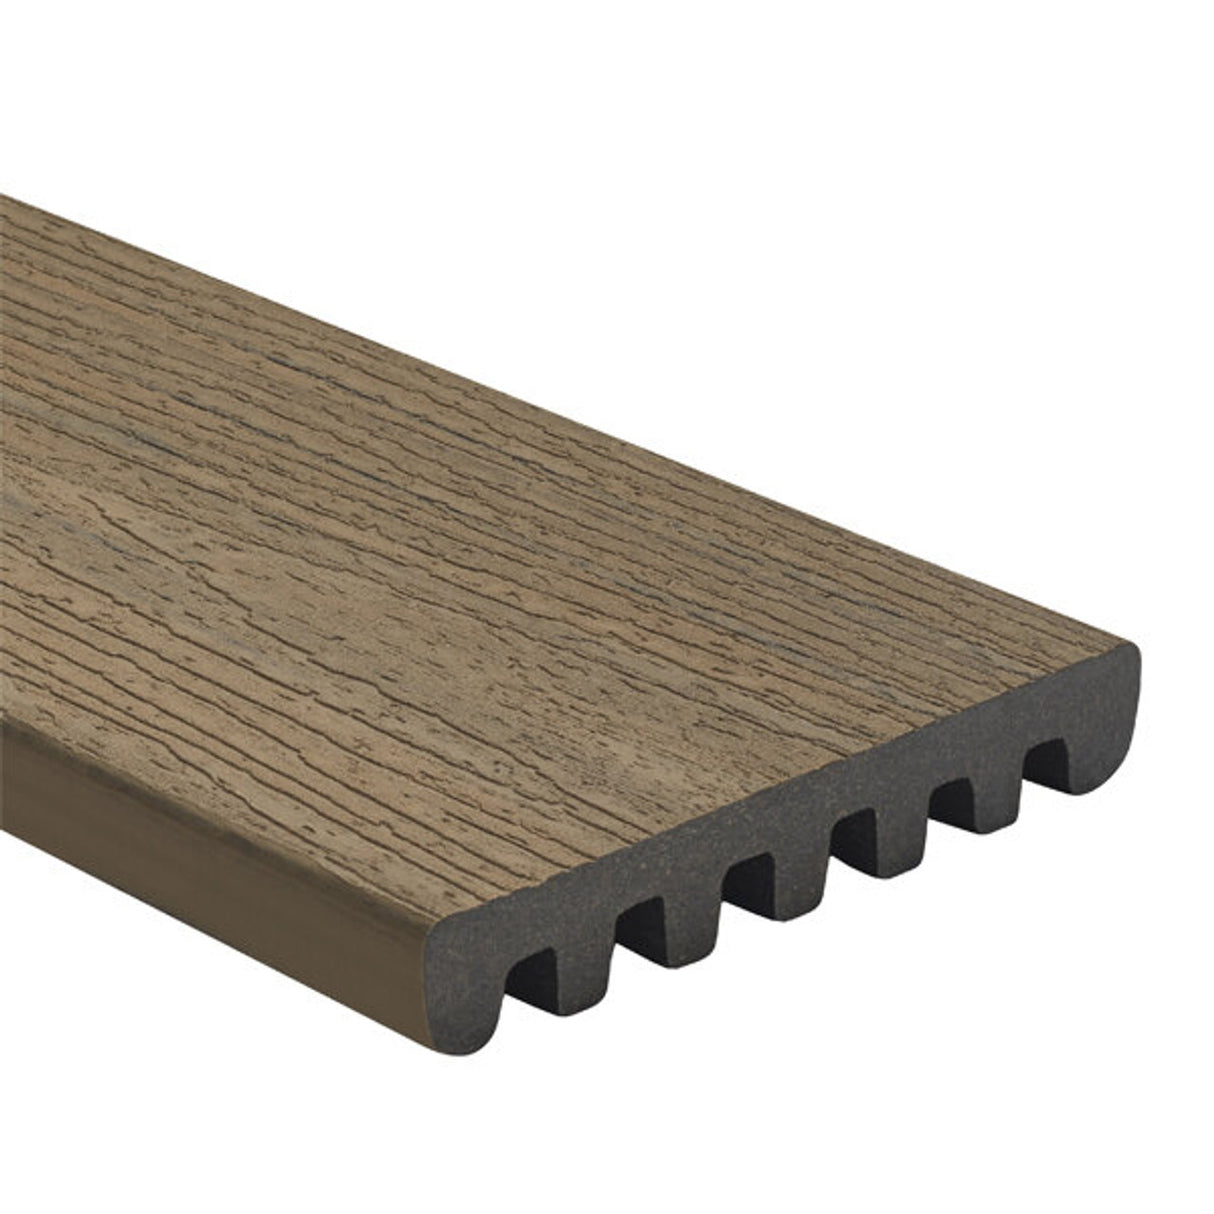 Trex Decking Board Composite Fascia 14mmx184mm Toasted Sand 3660mm